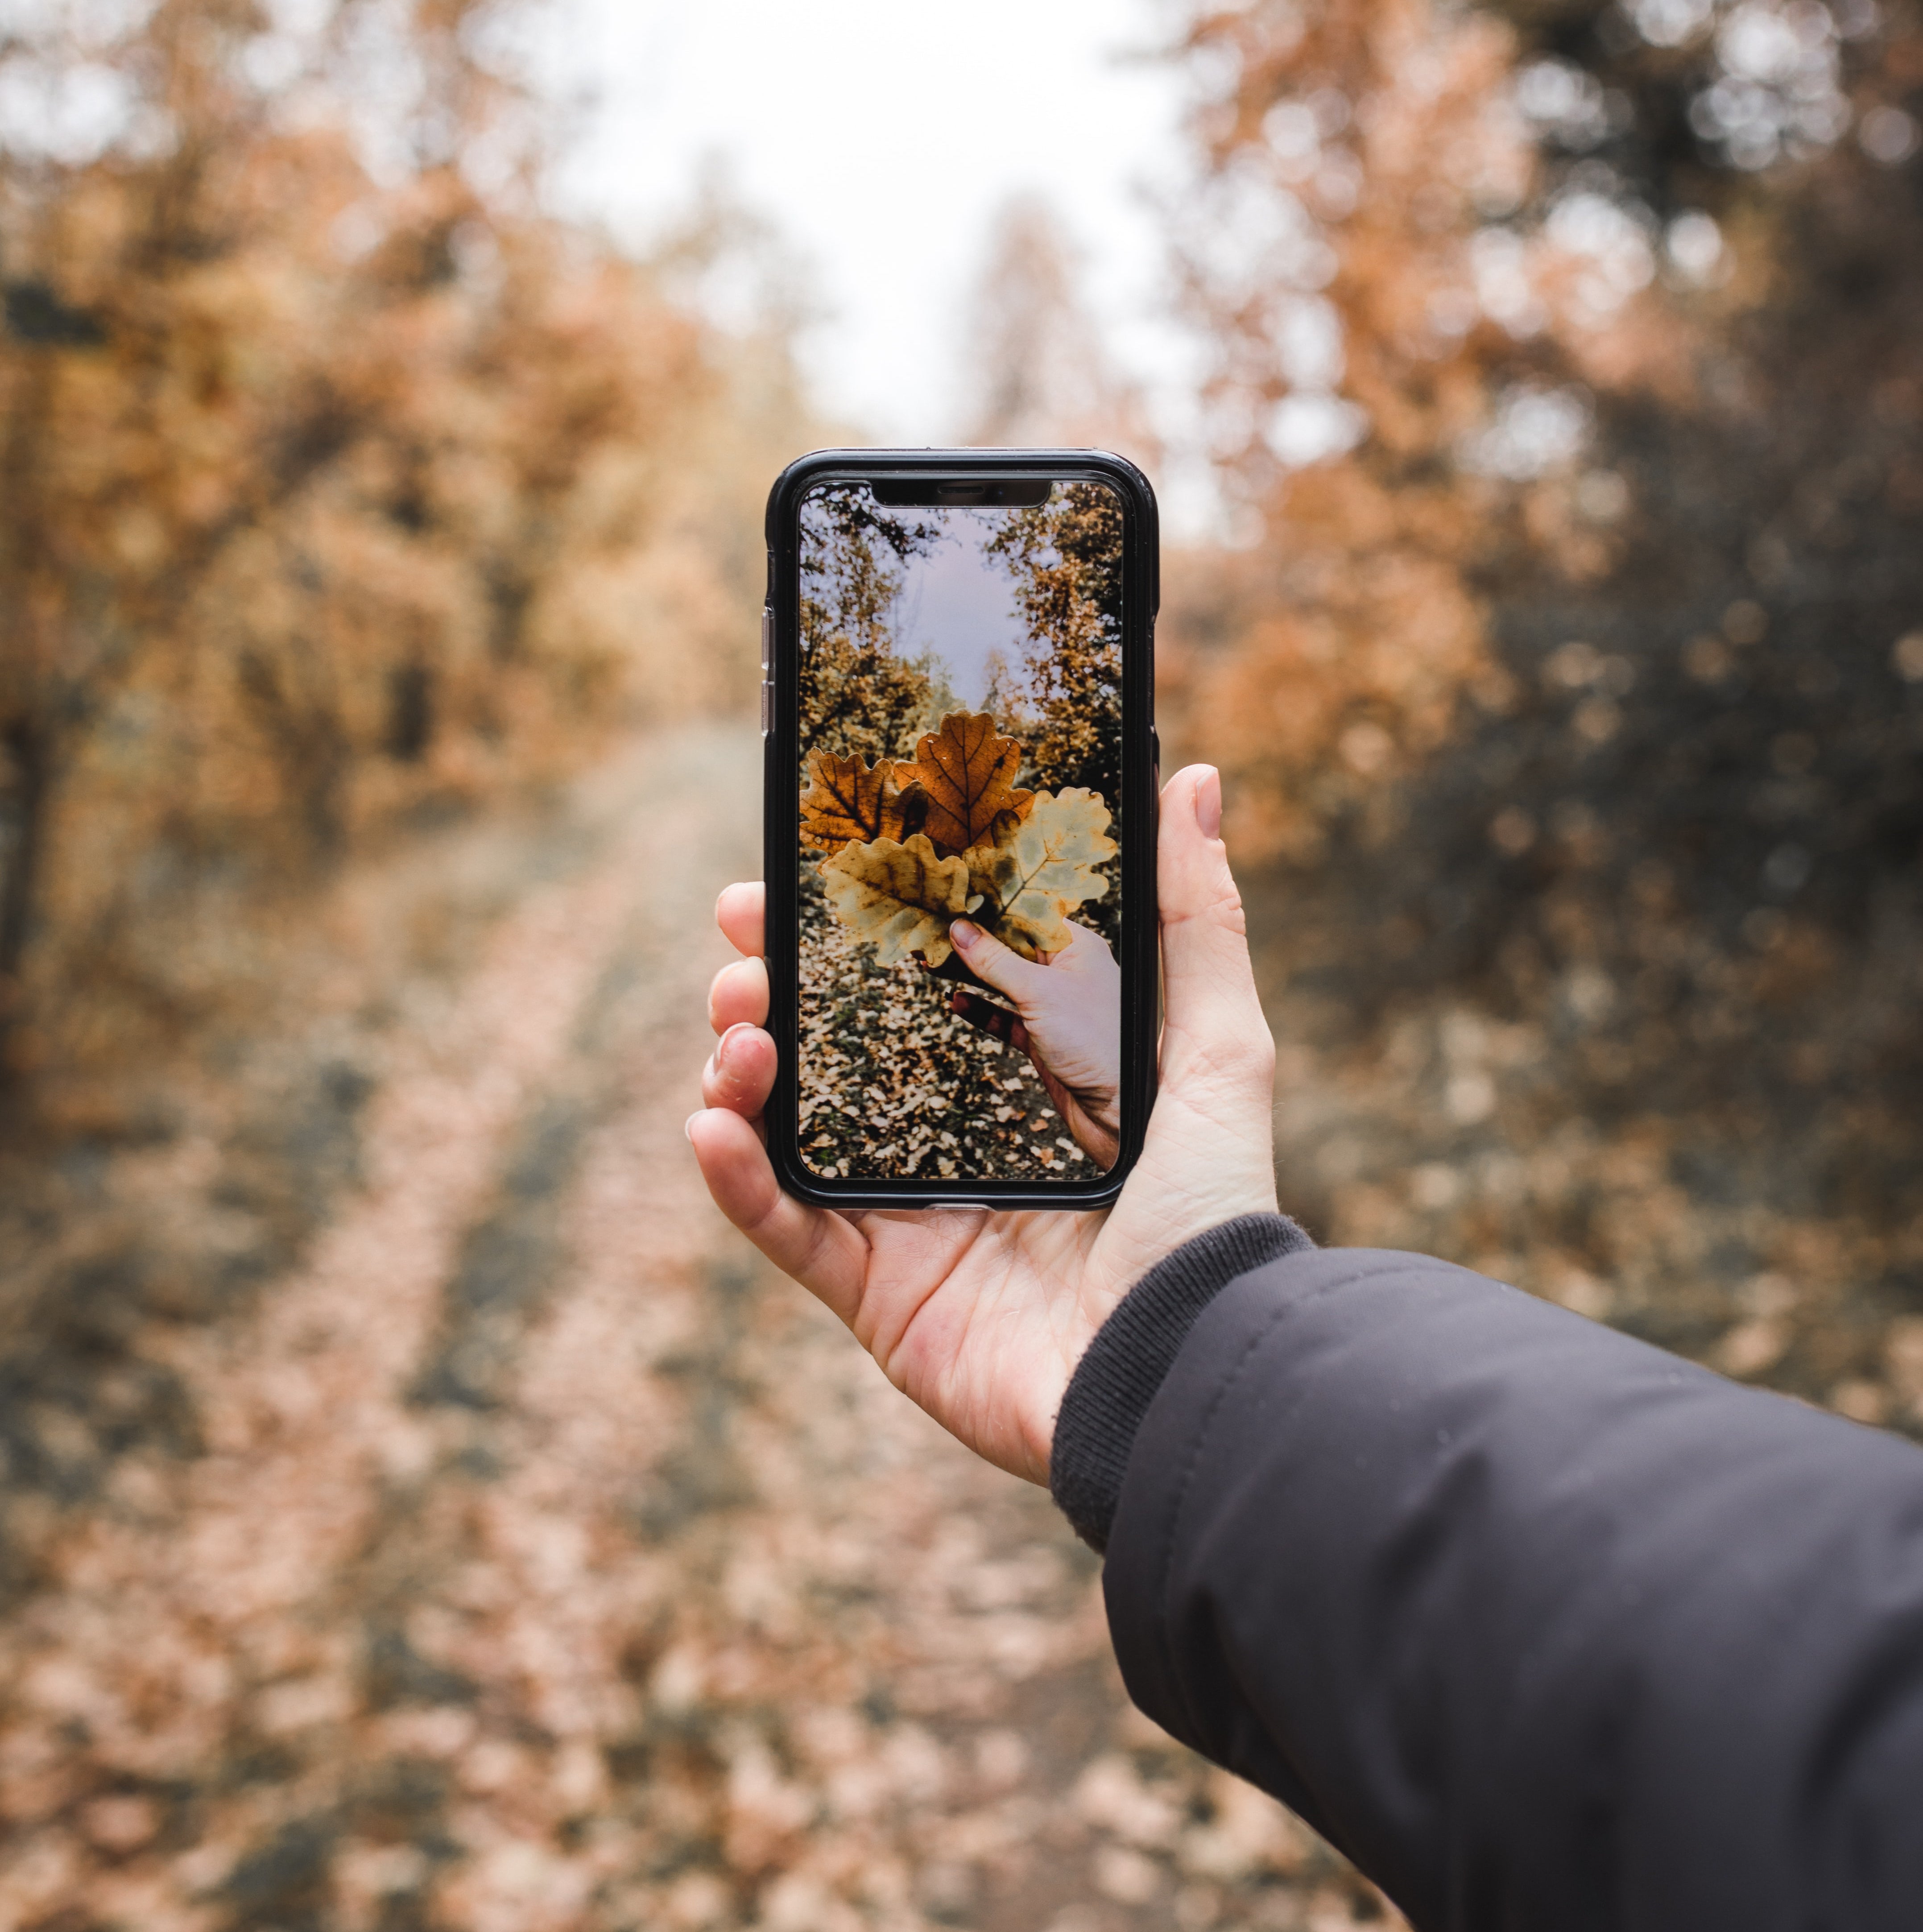 Autumn Photo Ideas - Person Holding Smartphone Capturing a Fall Picture